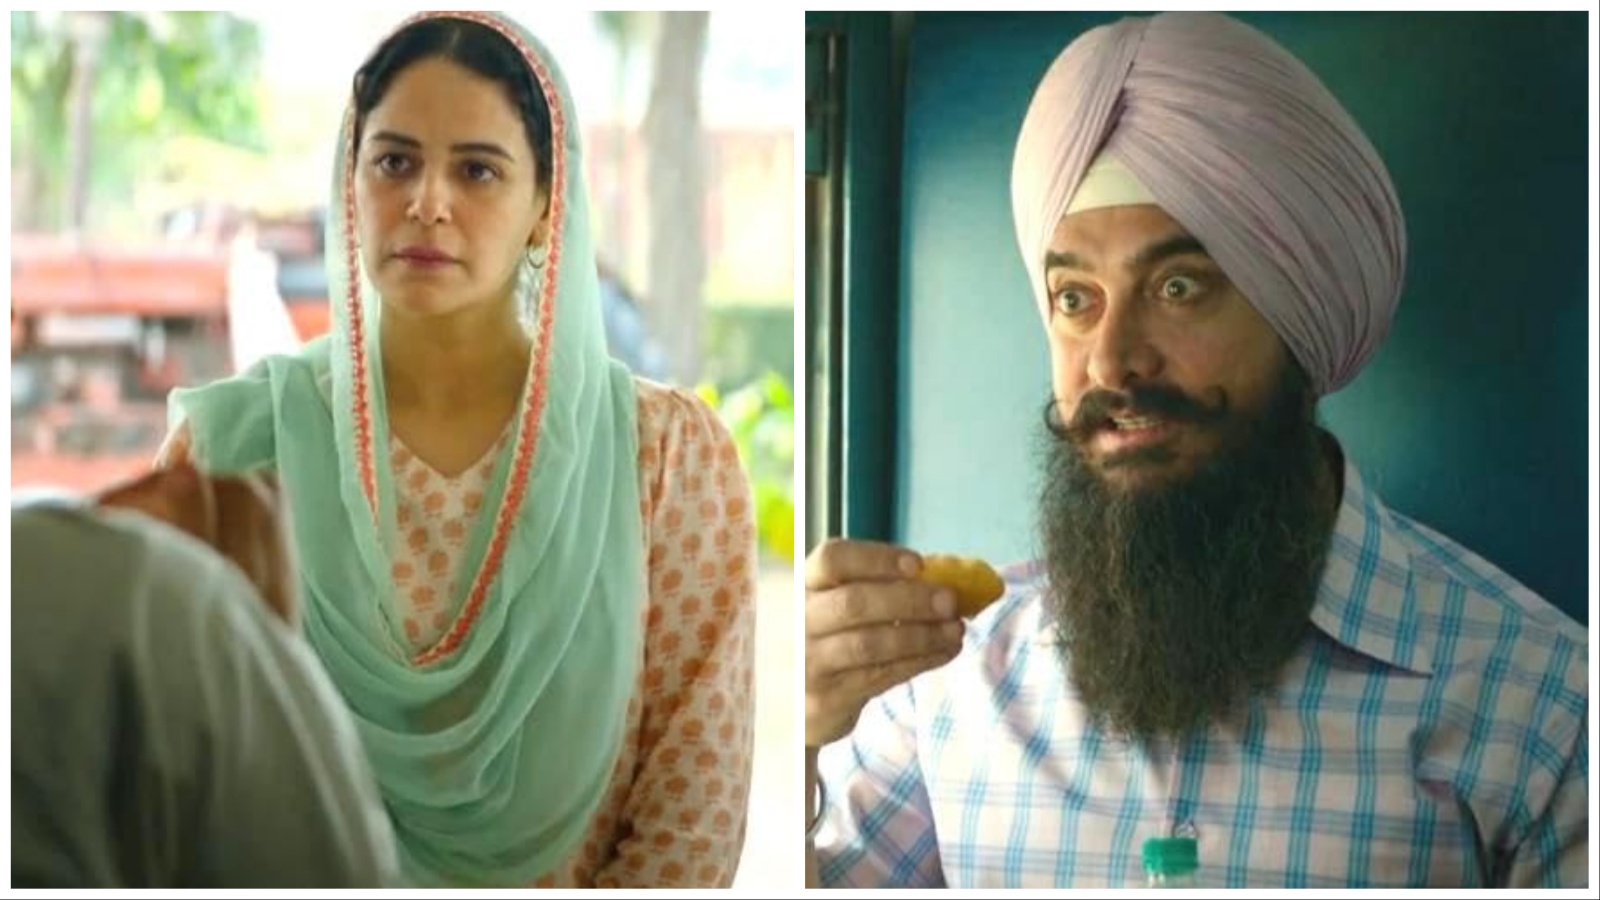 Mona Singh reveals what Aamir Khan told her post Laal Singh Chaddha's box  office failure: 'We all have to move on